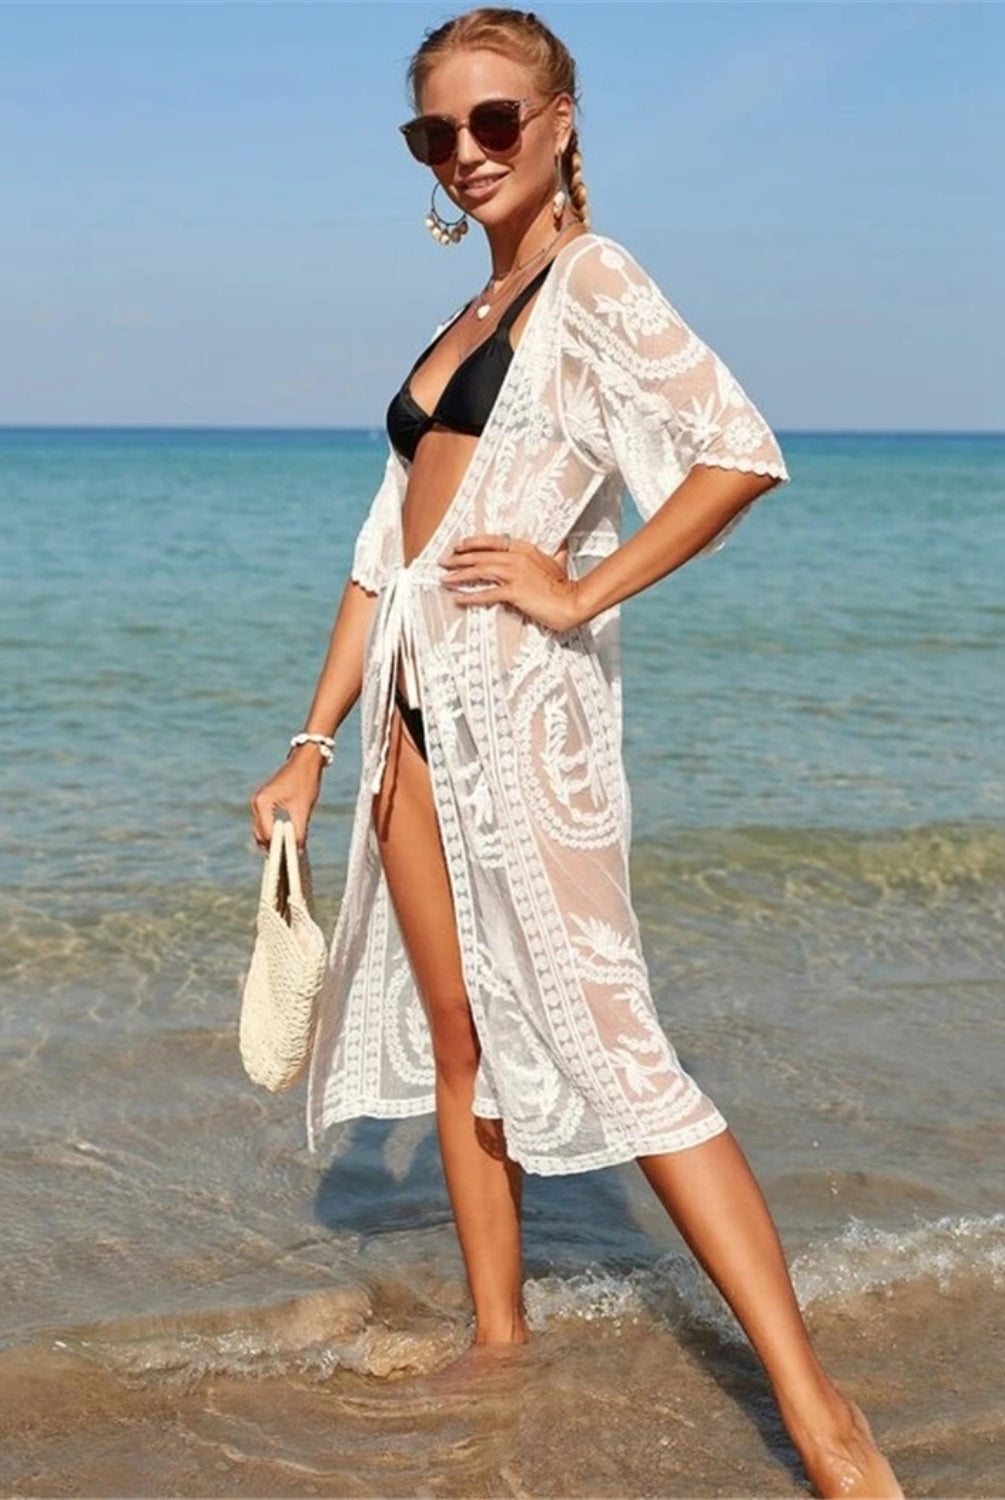  Fashionable woman wearing a white cover up with half sleeves on the beach.